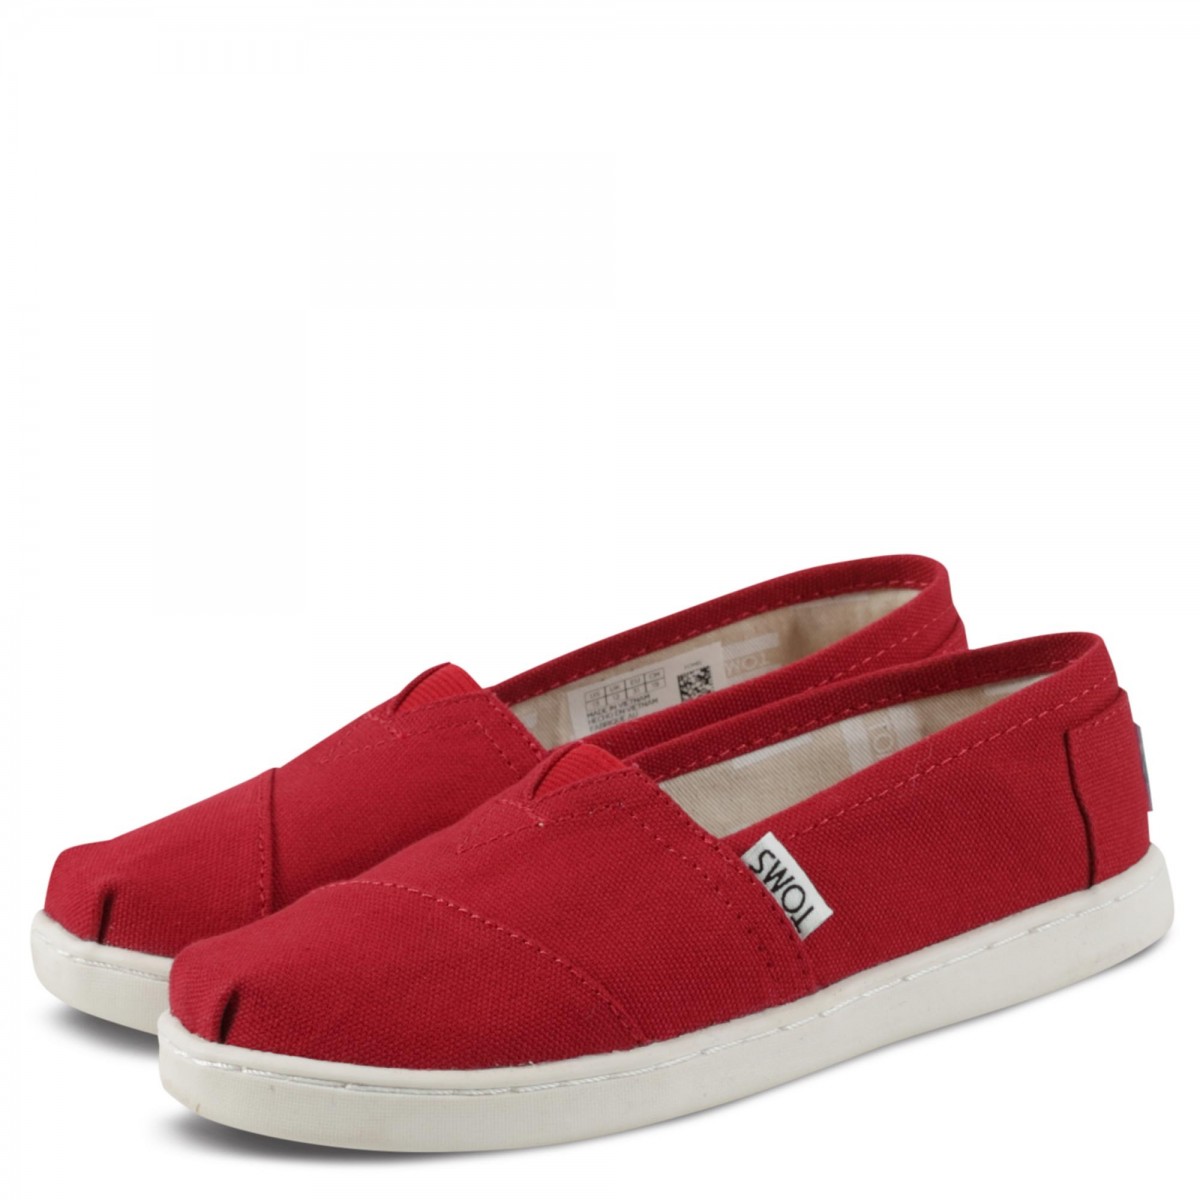 Toms Classic Red Canvas 10010534 SS18 Κόκκινο 62145a87ea5c3cfd455b0ae861686d6e199d